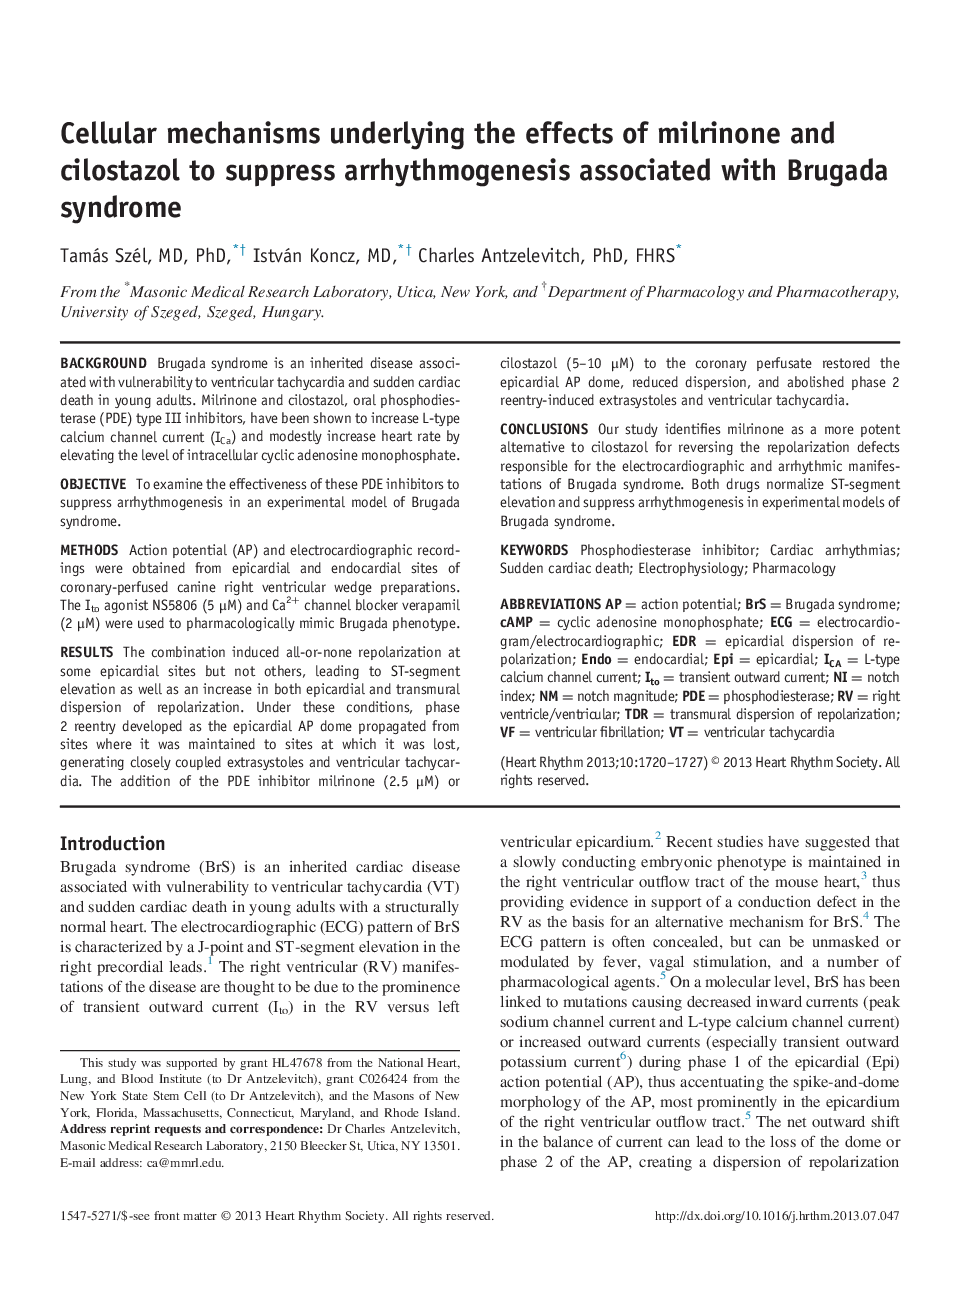 Cellular mechanisms underlying the effects of milrinone and cilostazol to suppress arrhythmogenesis associated with Brugada syndrome 